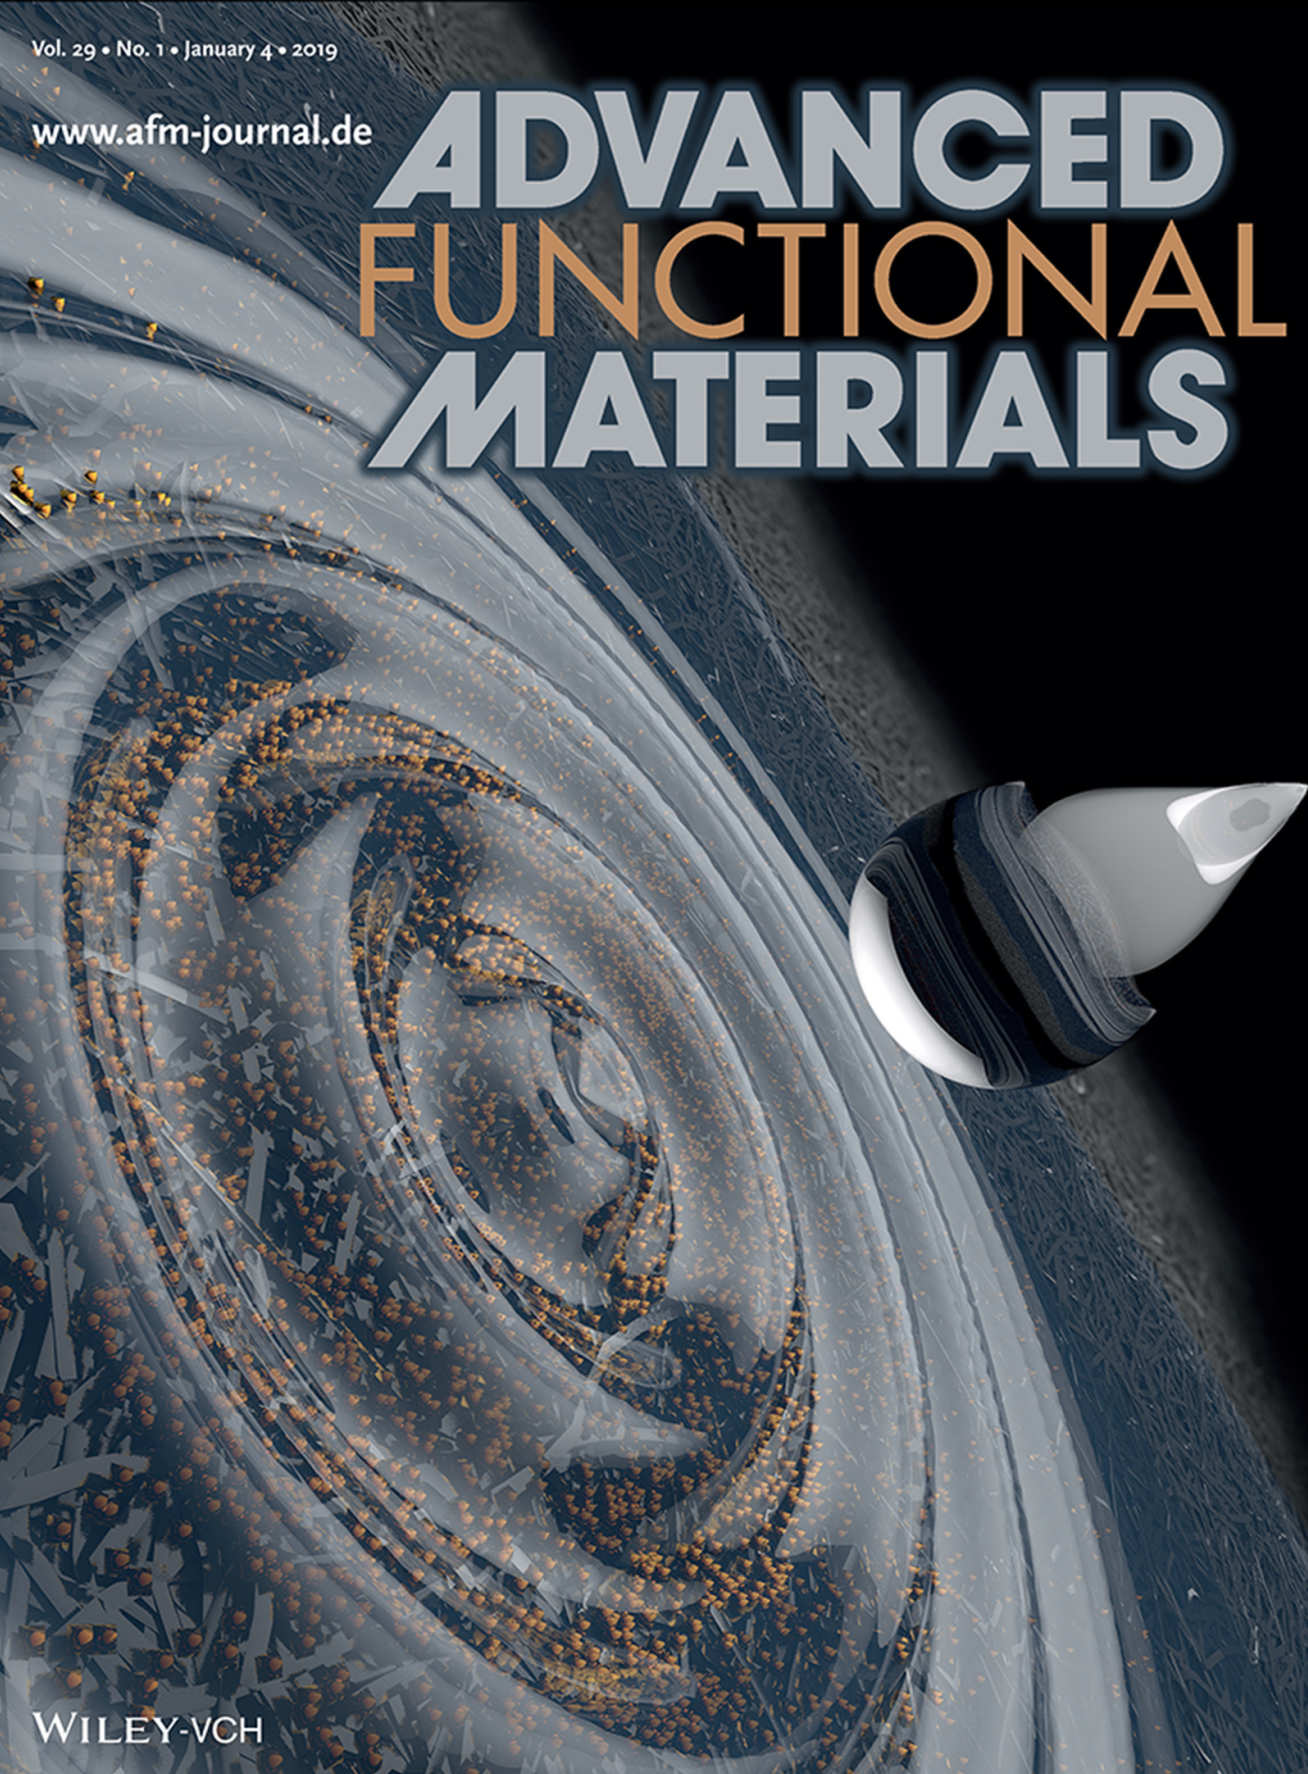 An illutration of the technique on the cover of the journal